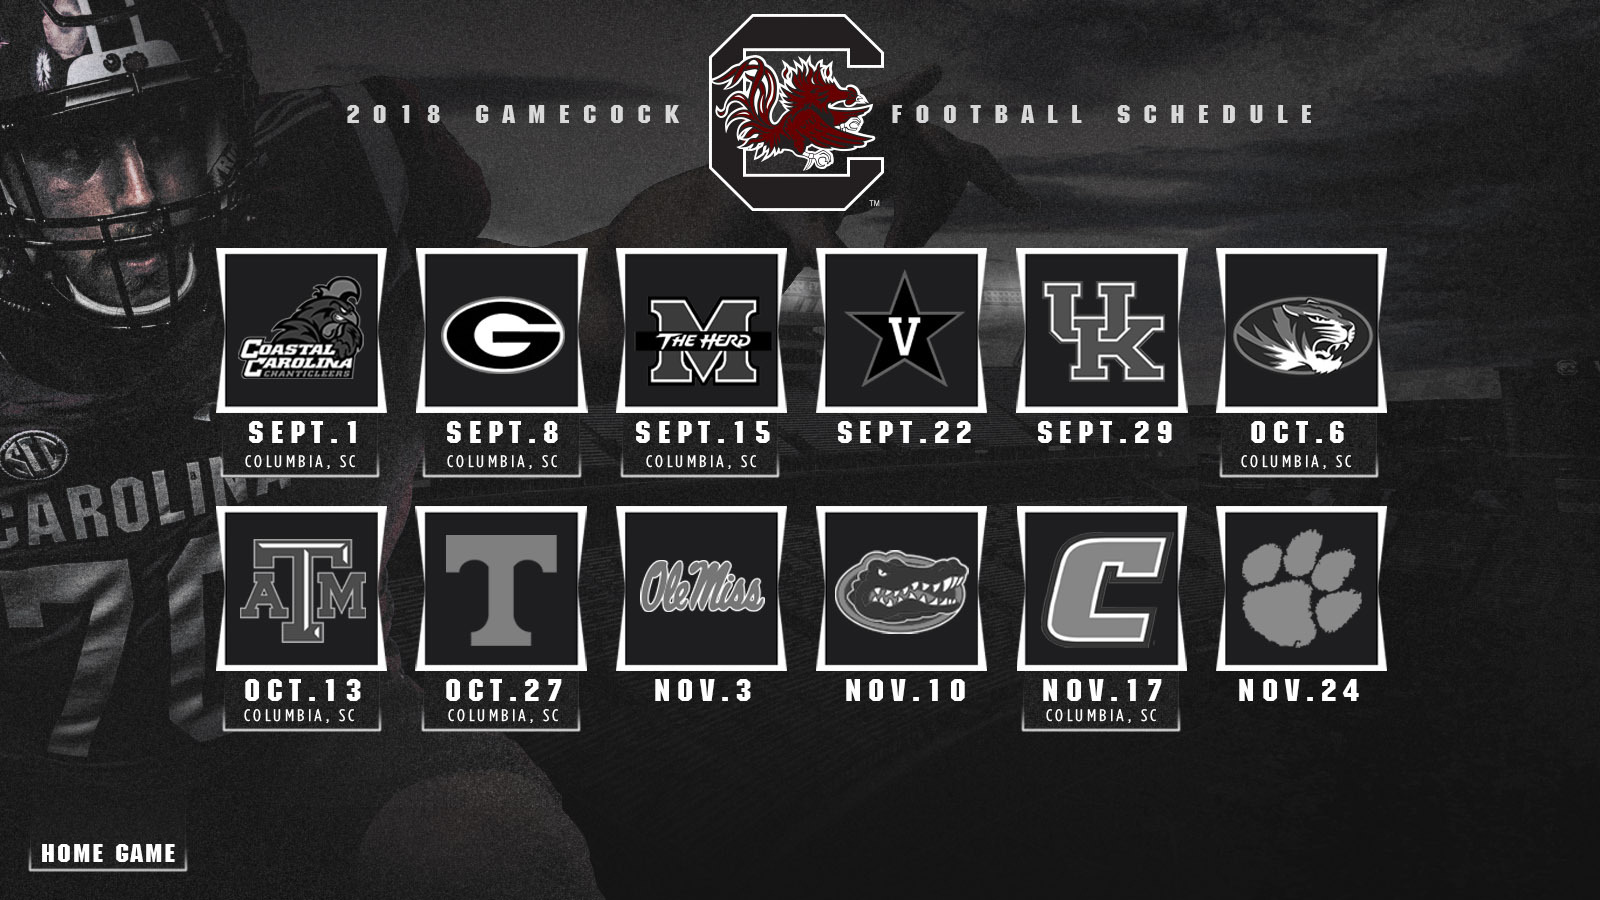 2018 Football Schedule Announced